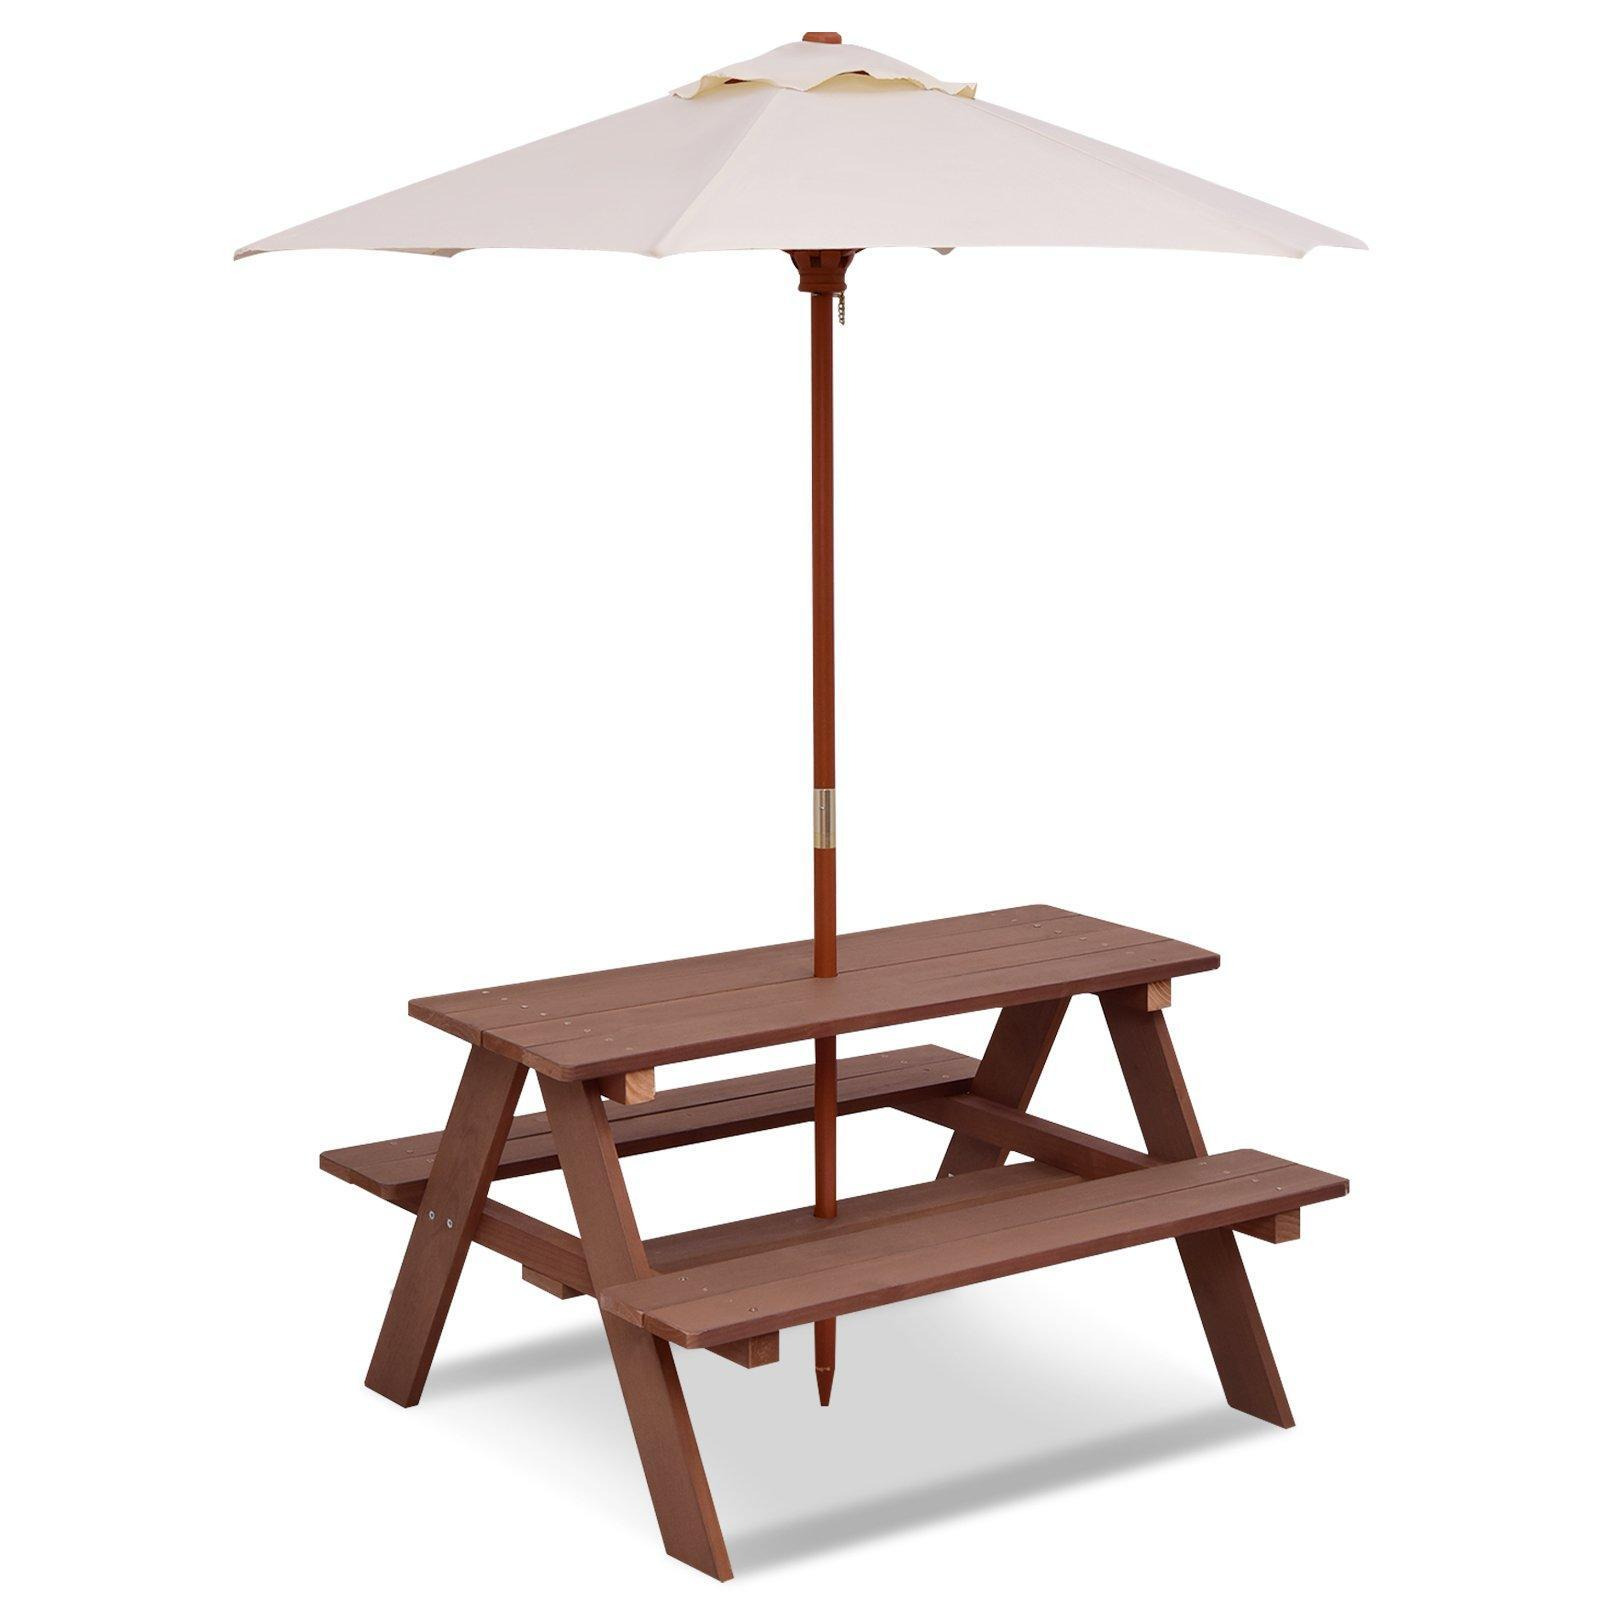 3 in 1 Kids Picnic Table Children Outdoor Activity Table w/ Removable Umbrella - image 1